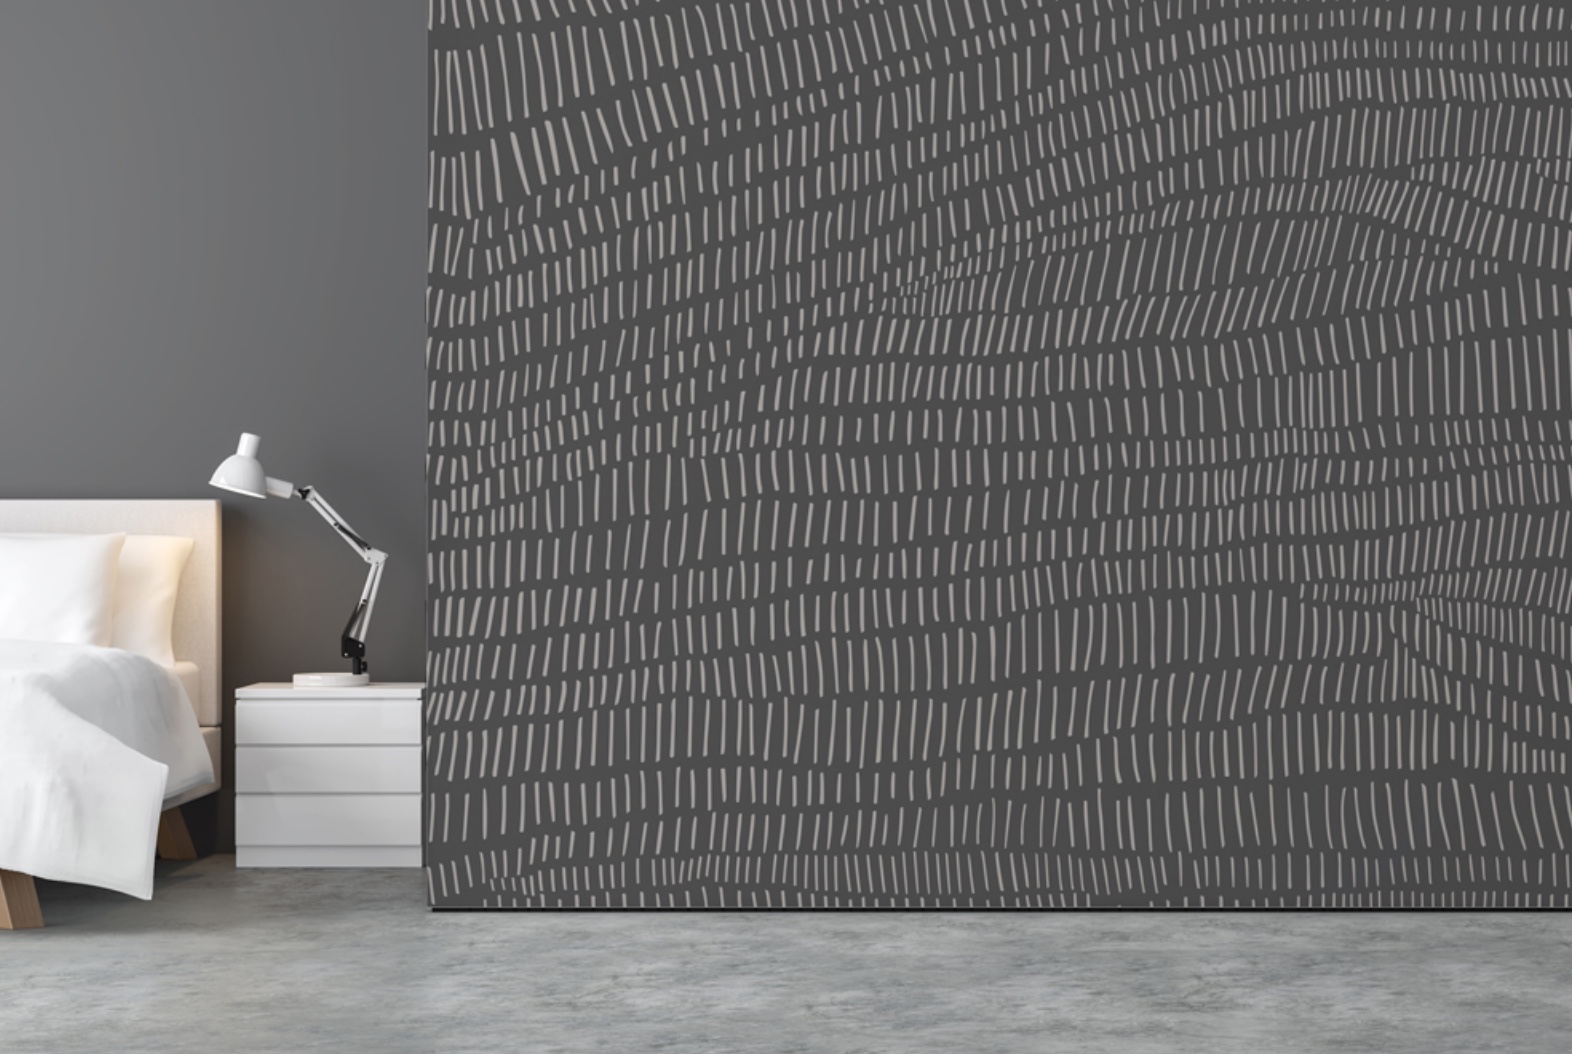 wall with dark gray wallpaper featuring multi-directional white lines